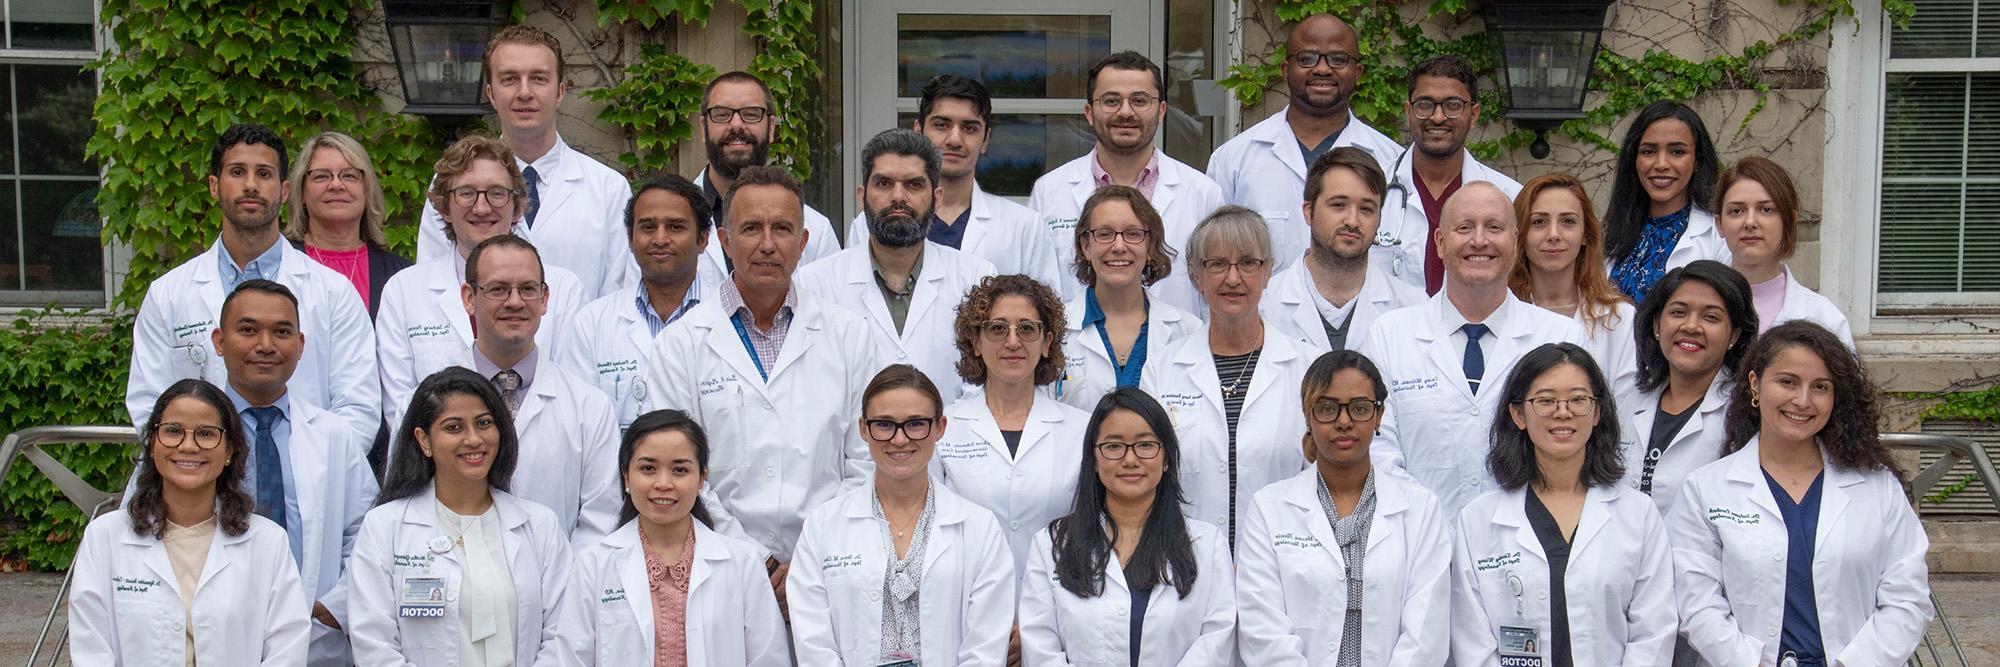 neurology group picture